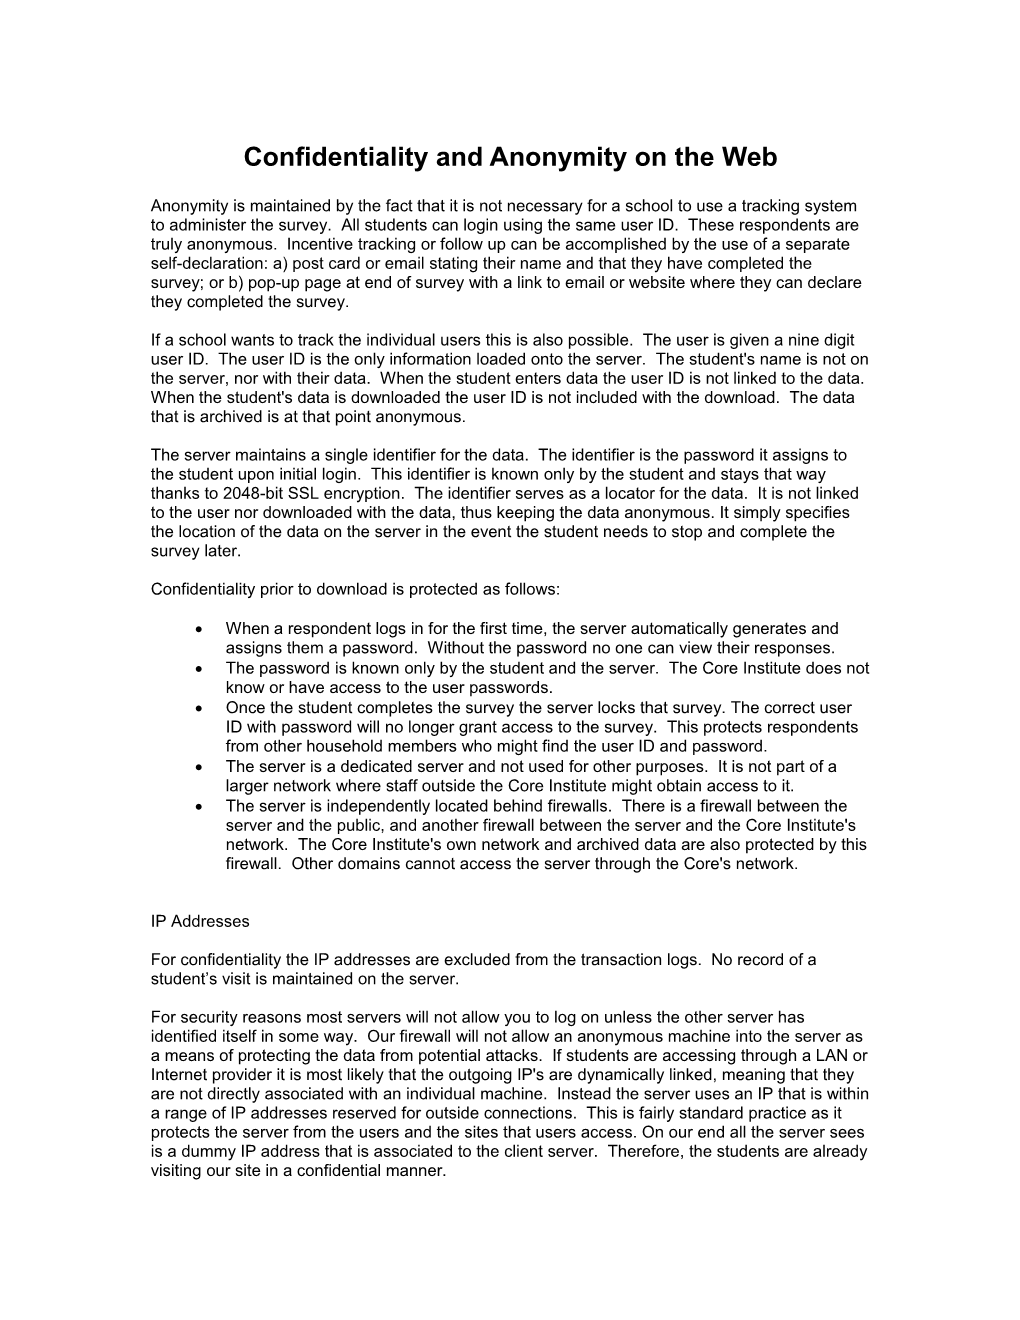 Confidentiality and Anonymity on the Web